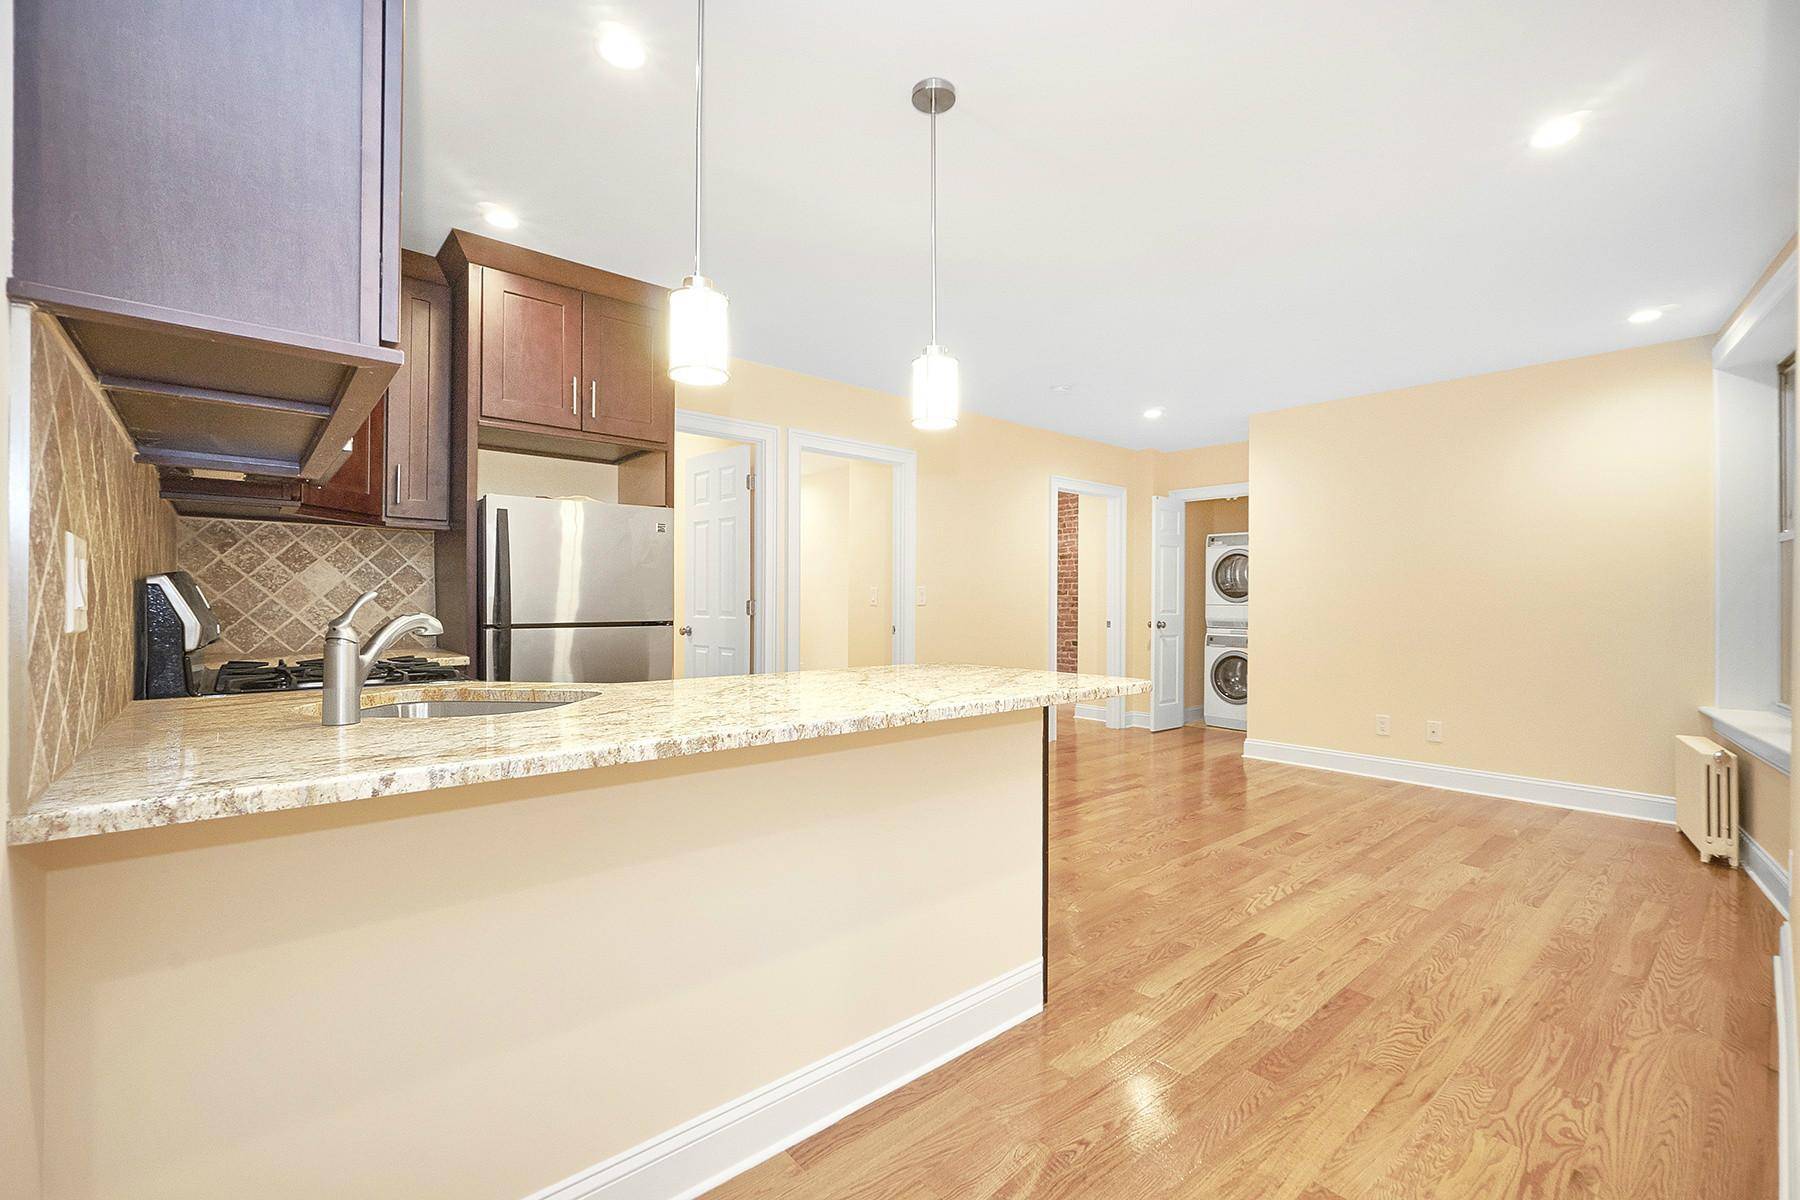 This apartment is located on a gorgeous Washington Heights street, right near Columbia Presbyterian Hospital and just 2 short blocks from the A Express train as well as 1 amp ...